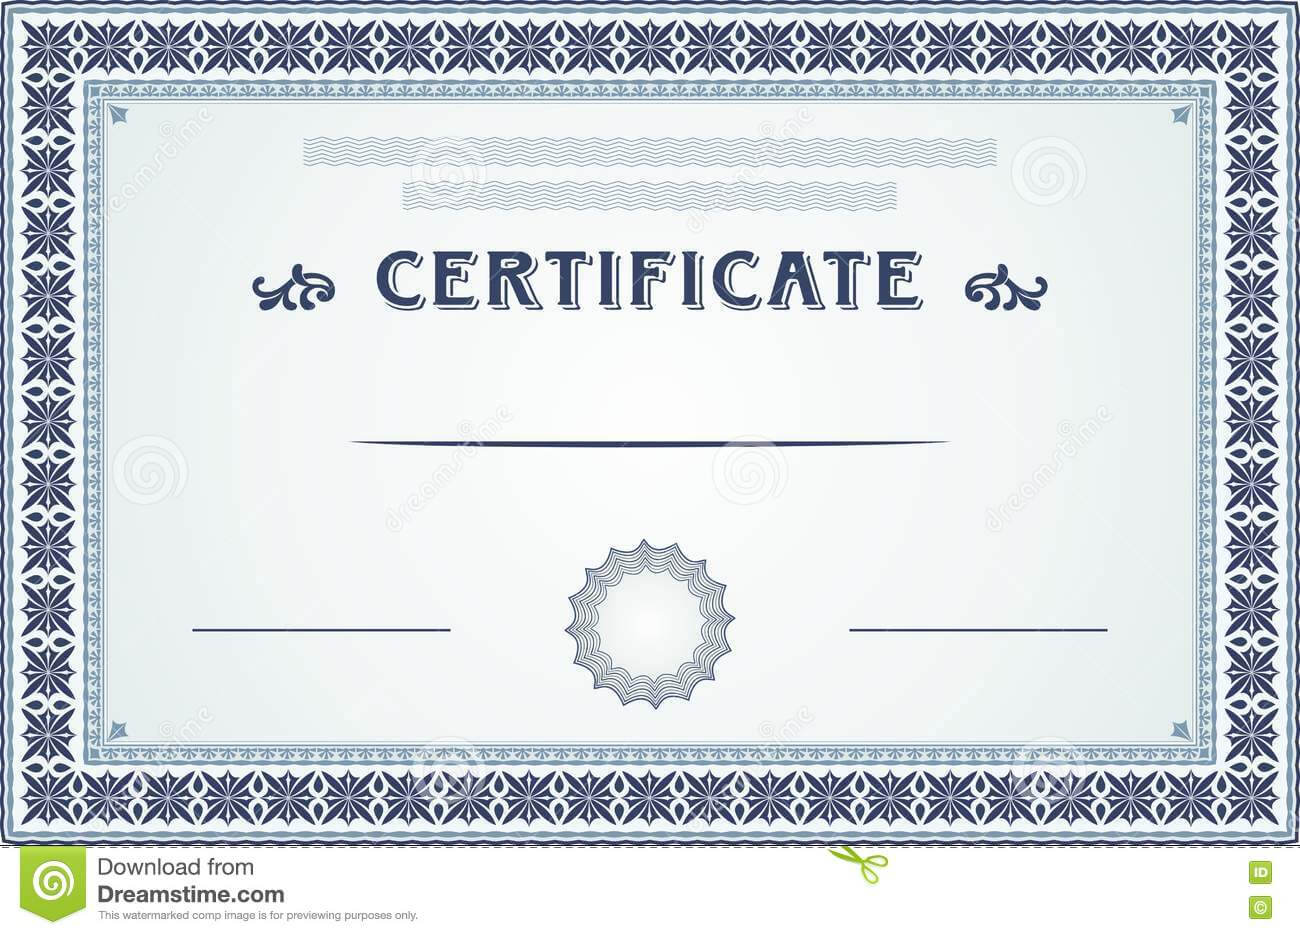 Certificate Border And Template Design Stock Vector With Certificate Border Design Templates